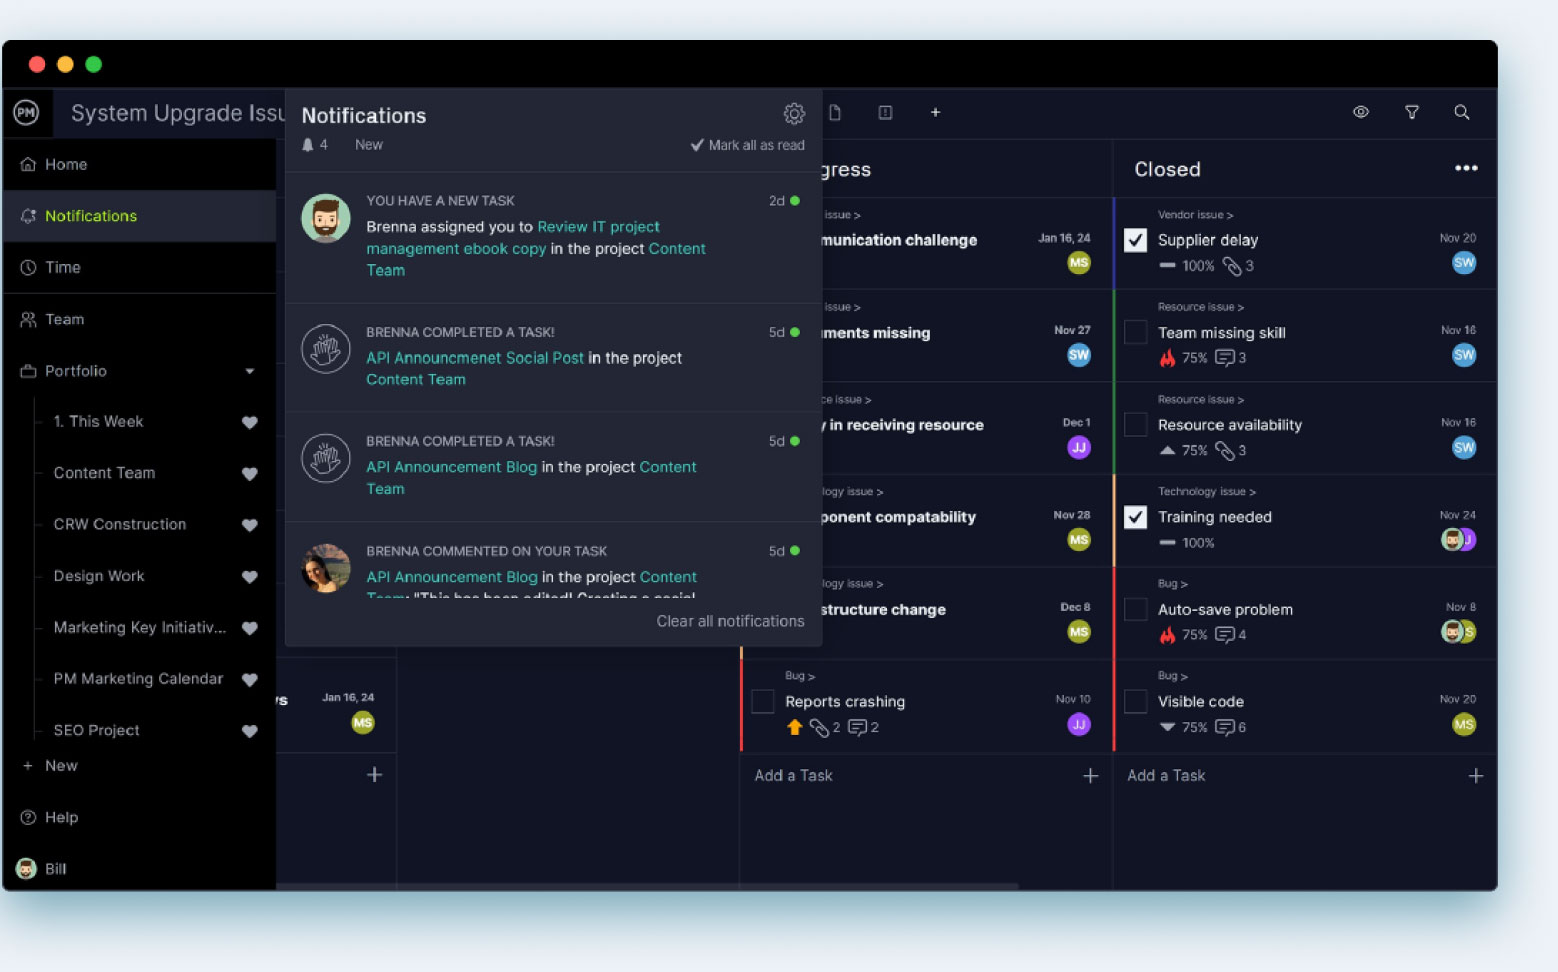 ProjectManager's team management dashboard keeps IT teams connected